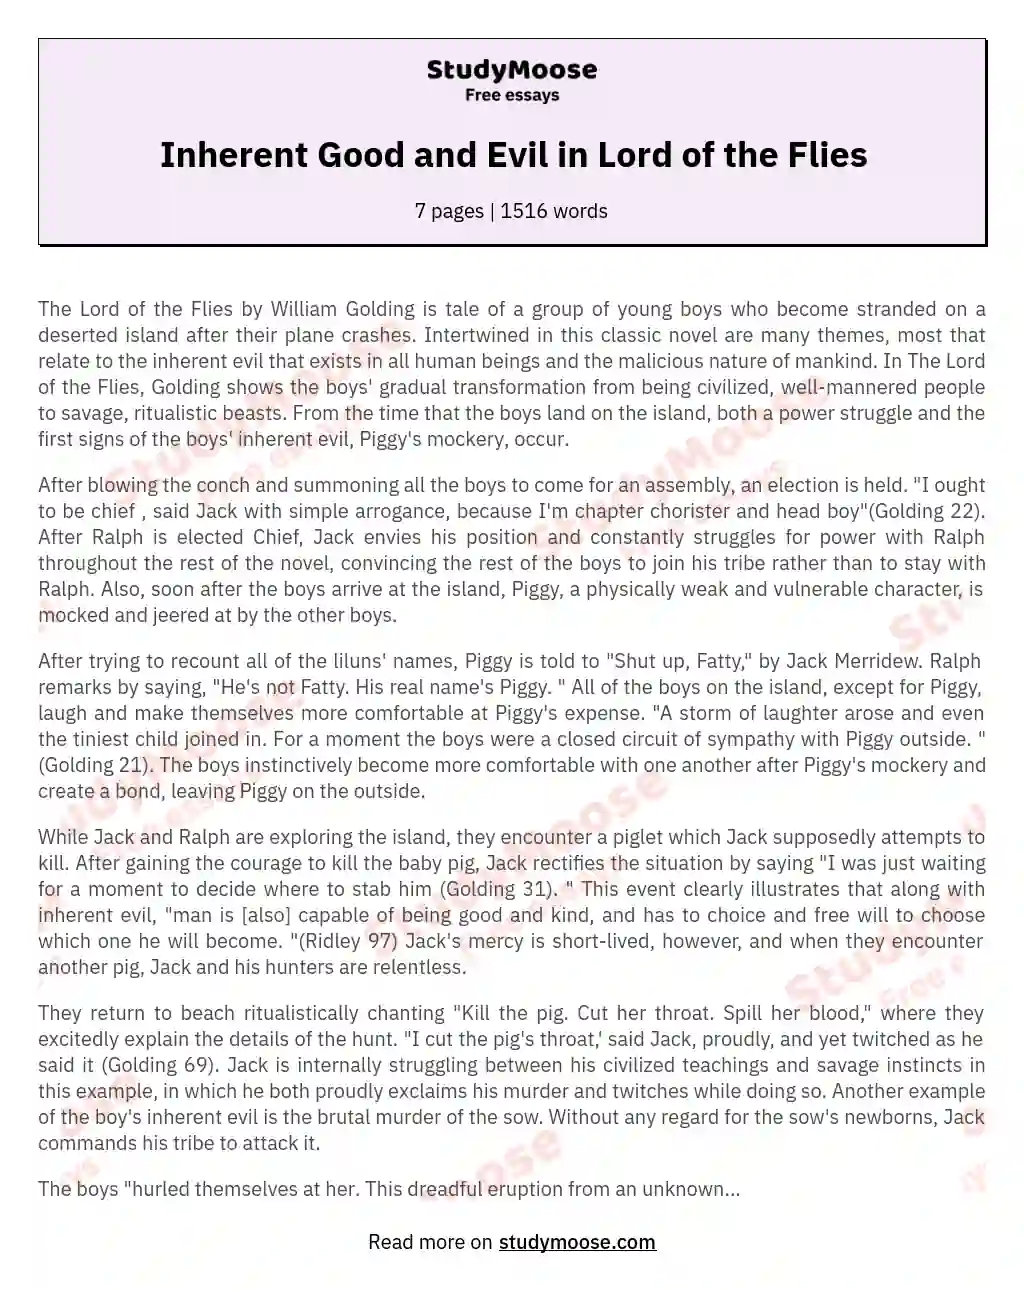 Inherent Good and Evil in Lord of the Flies essay